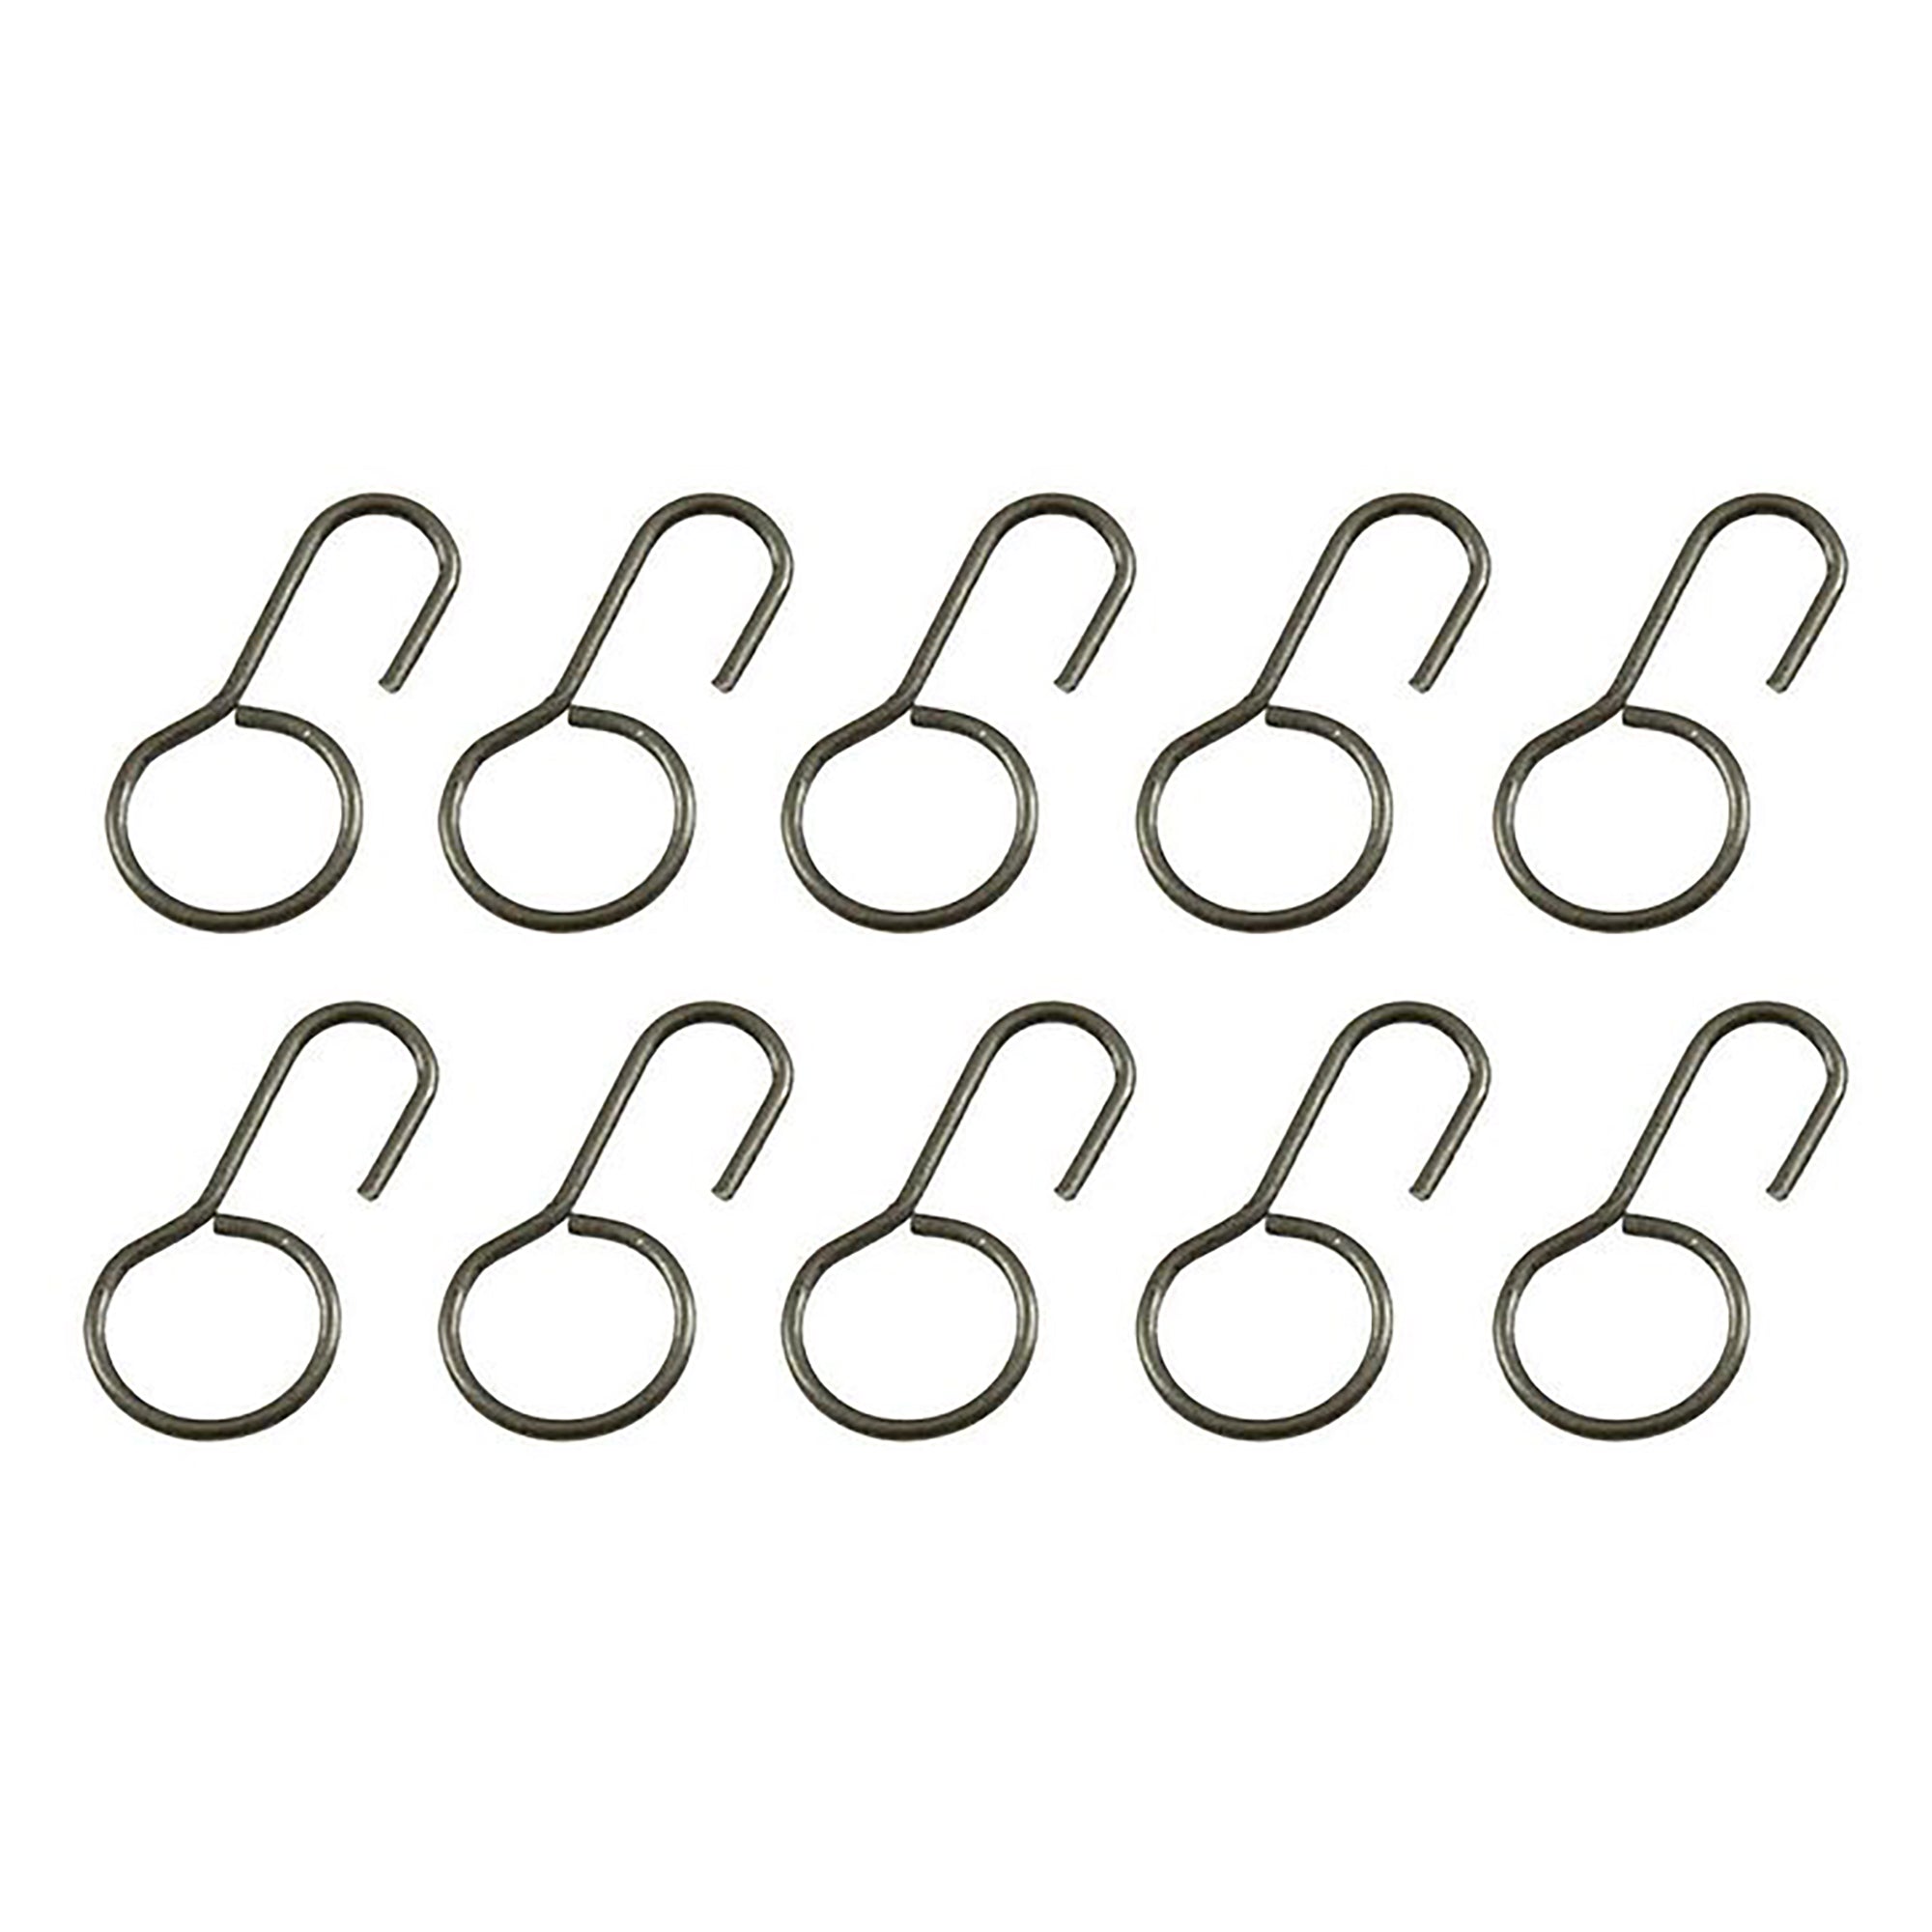 Joysway 881514 Dragon Force 65 V6 Stainless Steel Sail Clew Hook (Pack of 10)